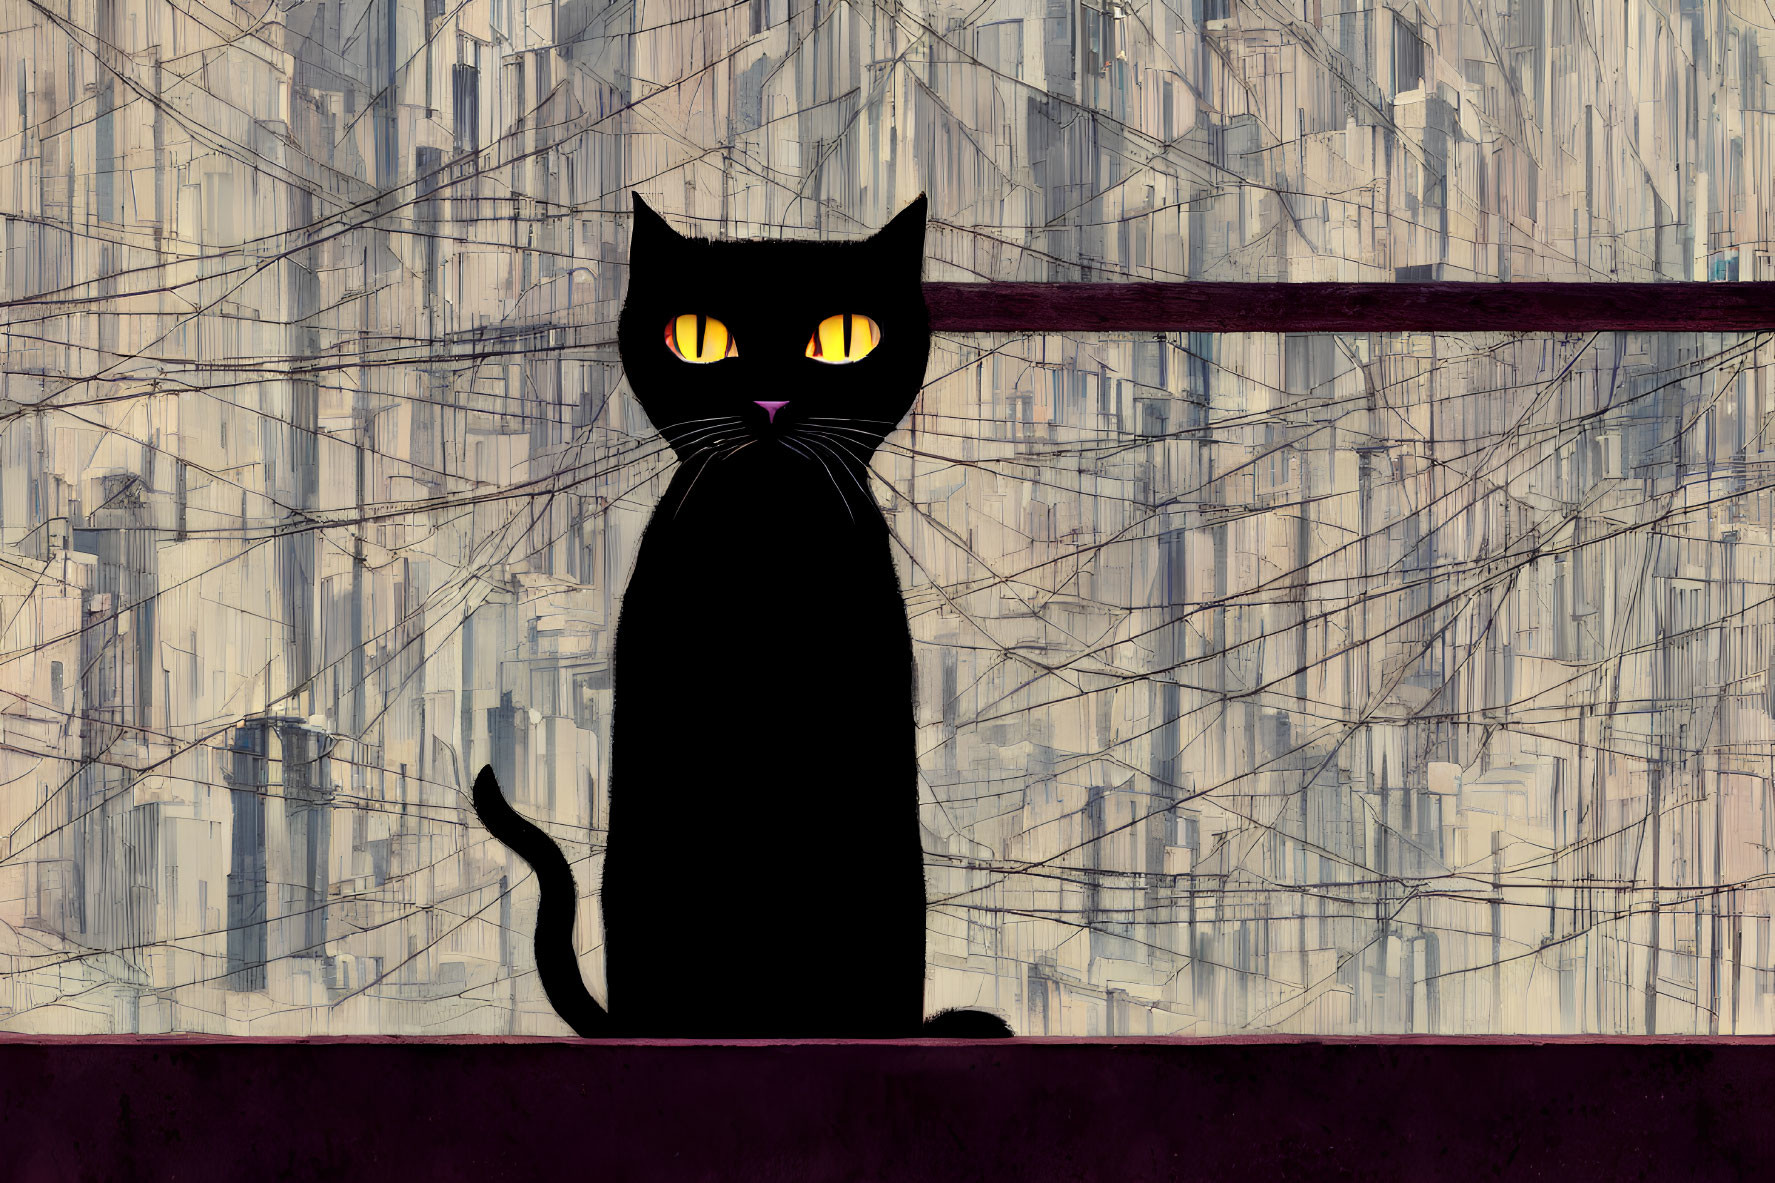 Black Cat with Glowing Yellow Eyes on Abstract Cityscape Ledge